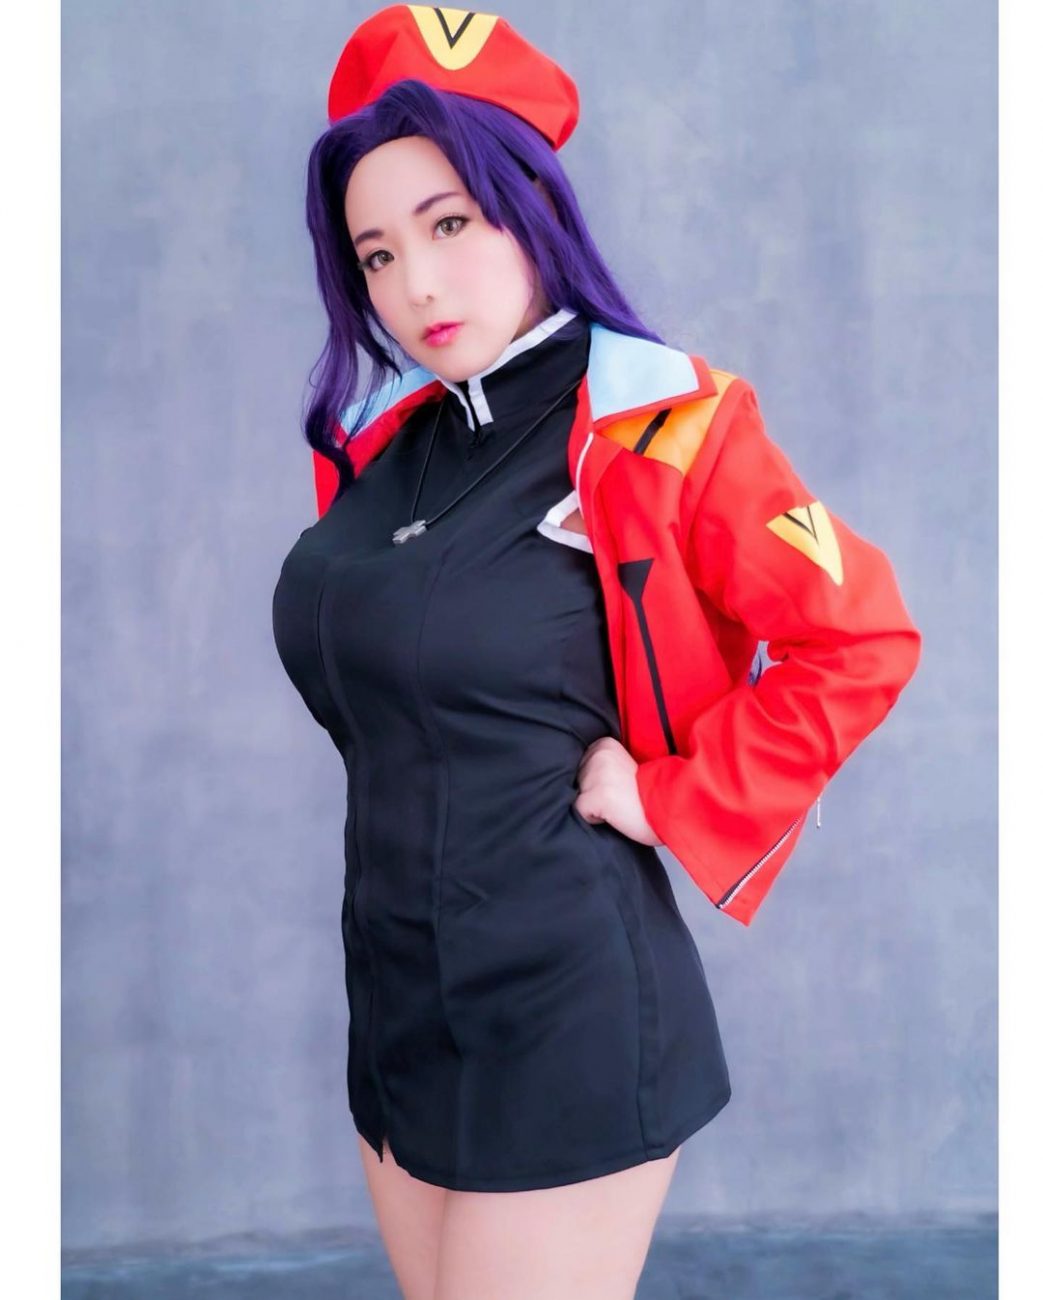 shibukaho Growing up Misato became from the least relatable character to the one I can identify the most with. evangelion 2021 07 29T20 04 19.000Z 9 scaled